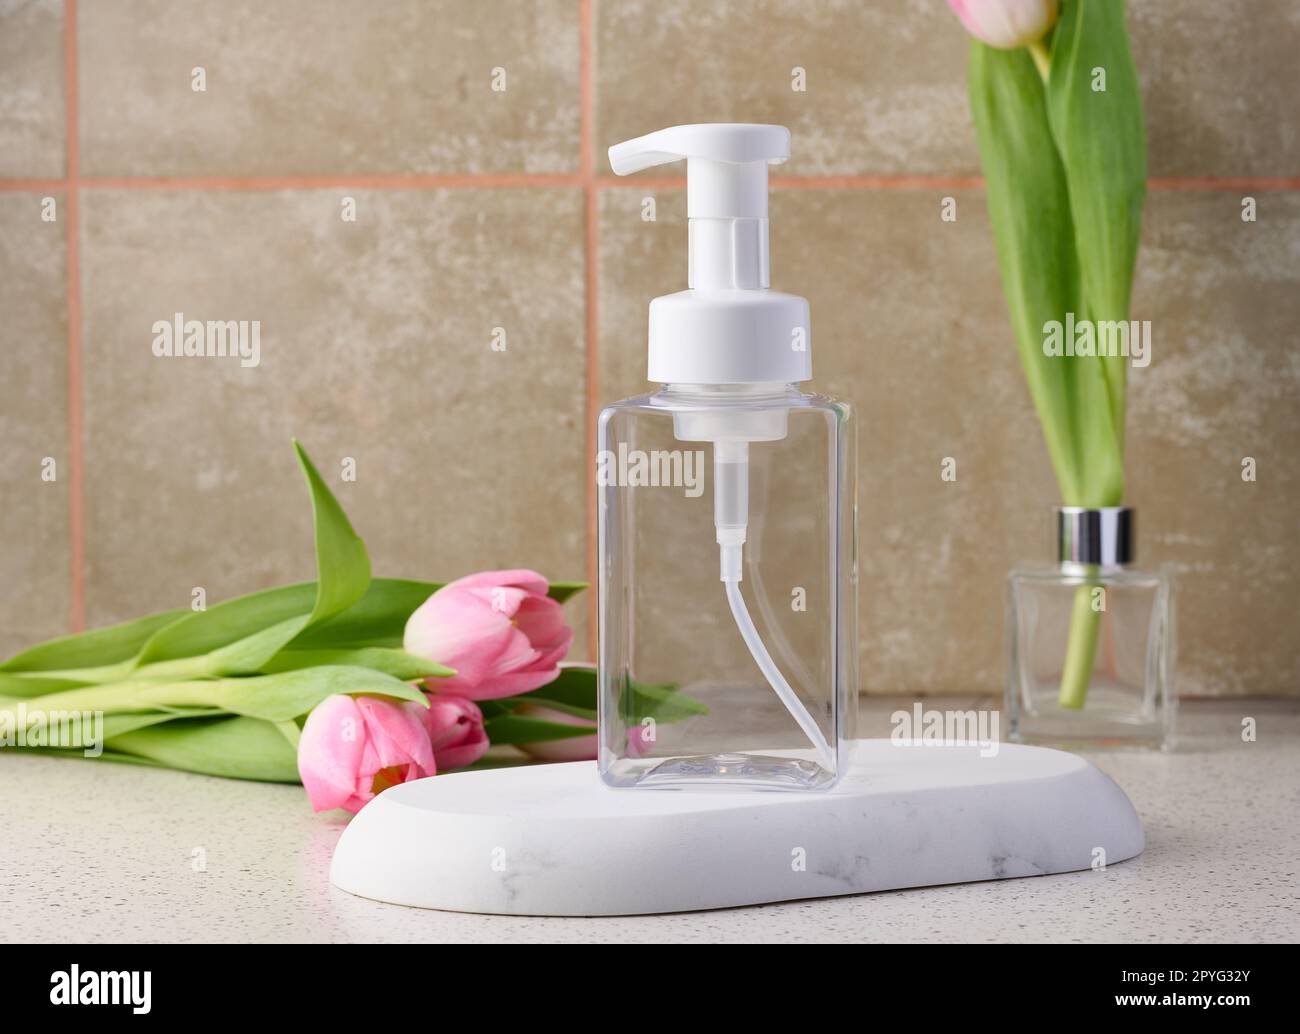 Transparent plastic container with a dispenser on the table. Bottle for liquid soap, shampoo Stock Photo